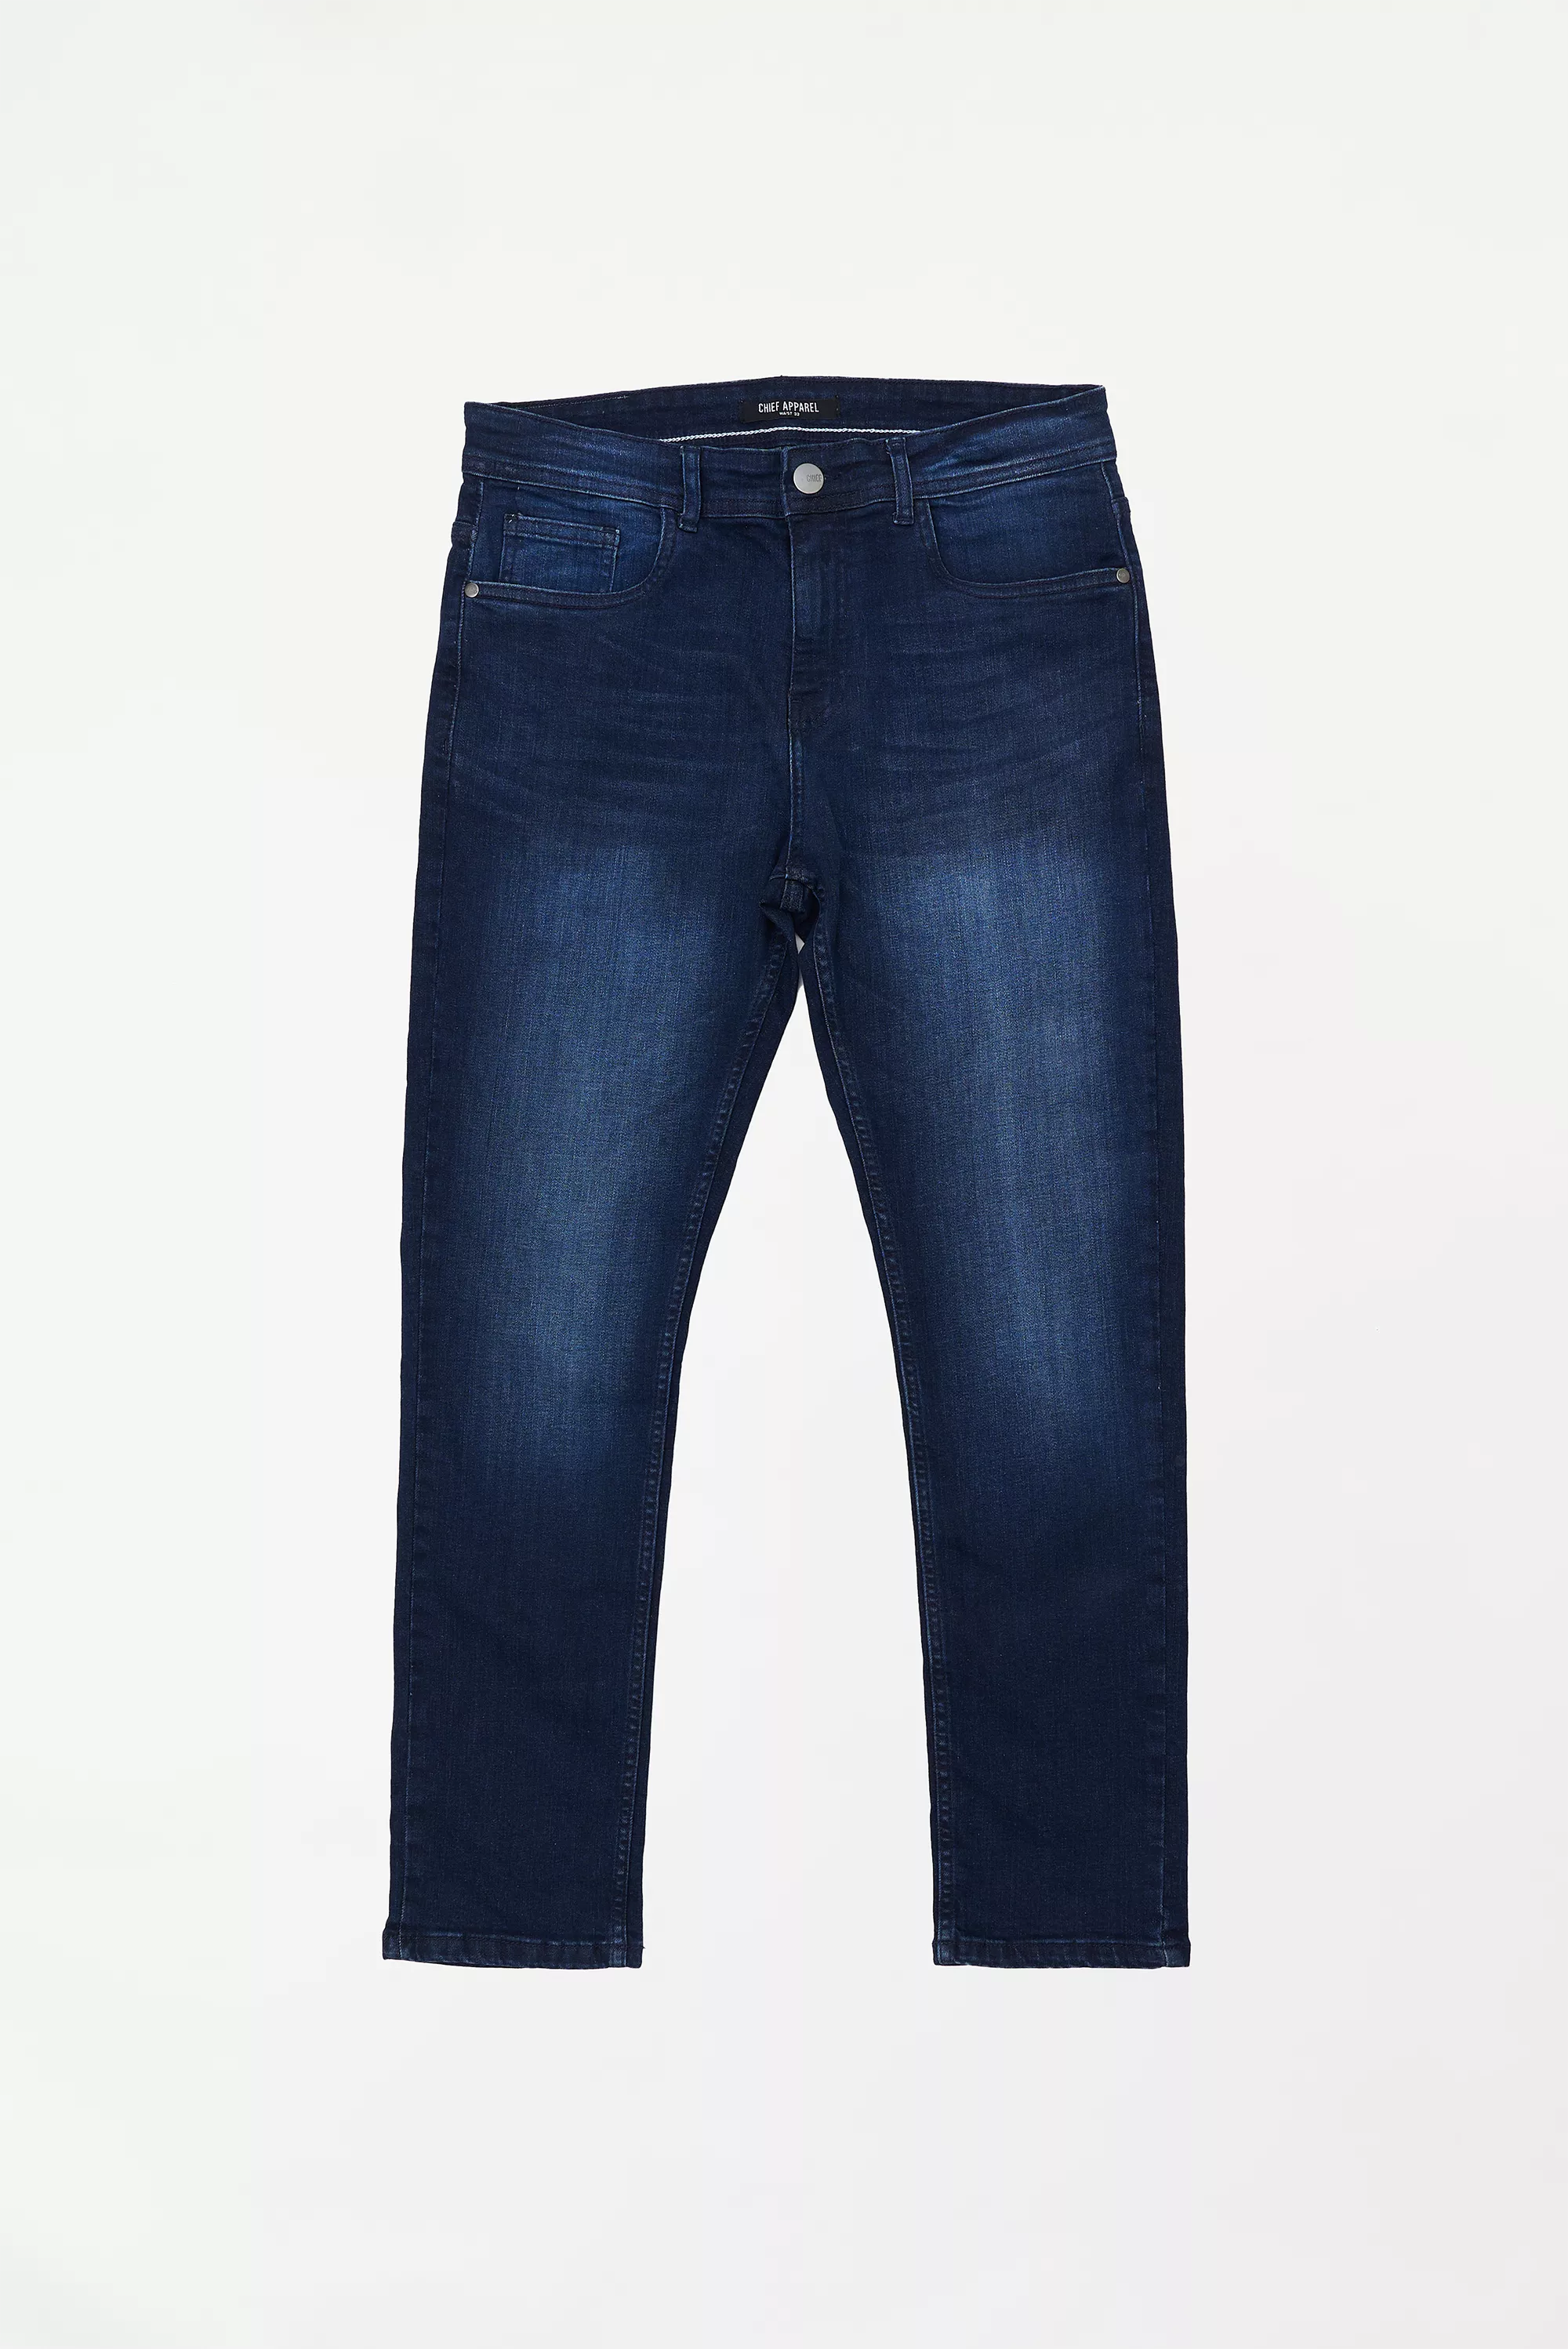 Men's Faded Tapered Fit Blue Jeans